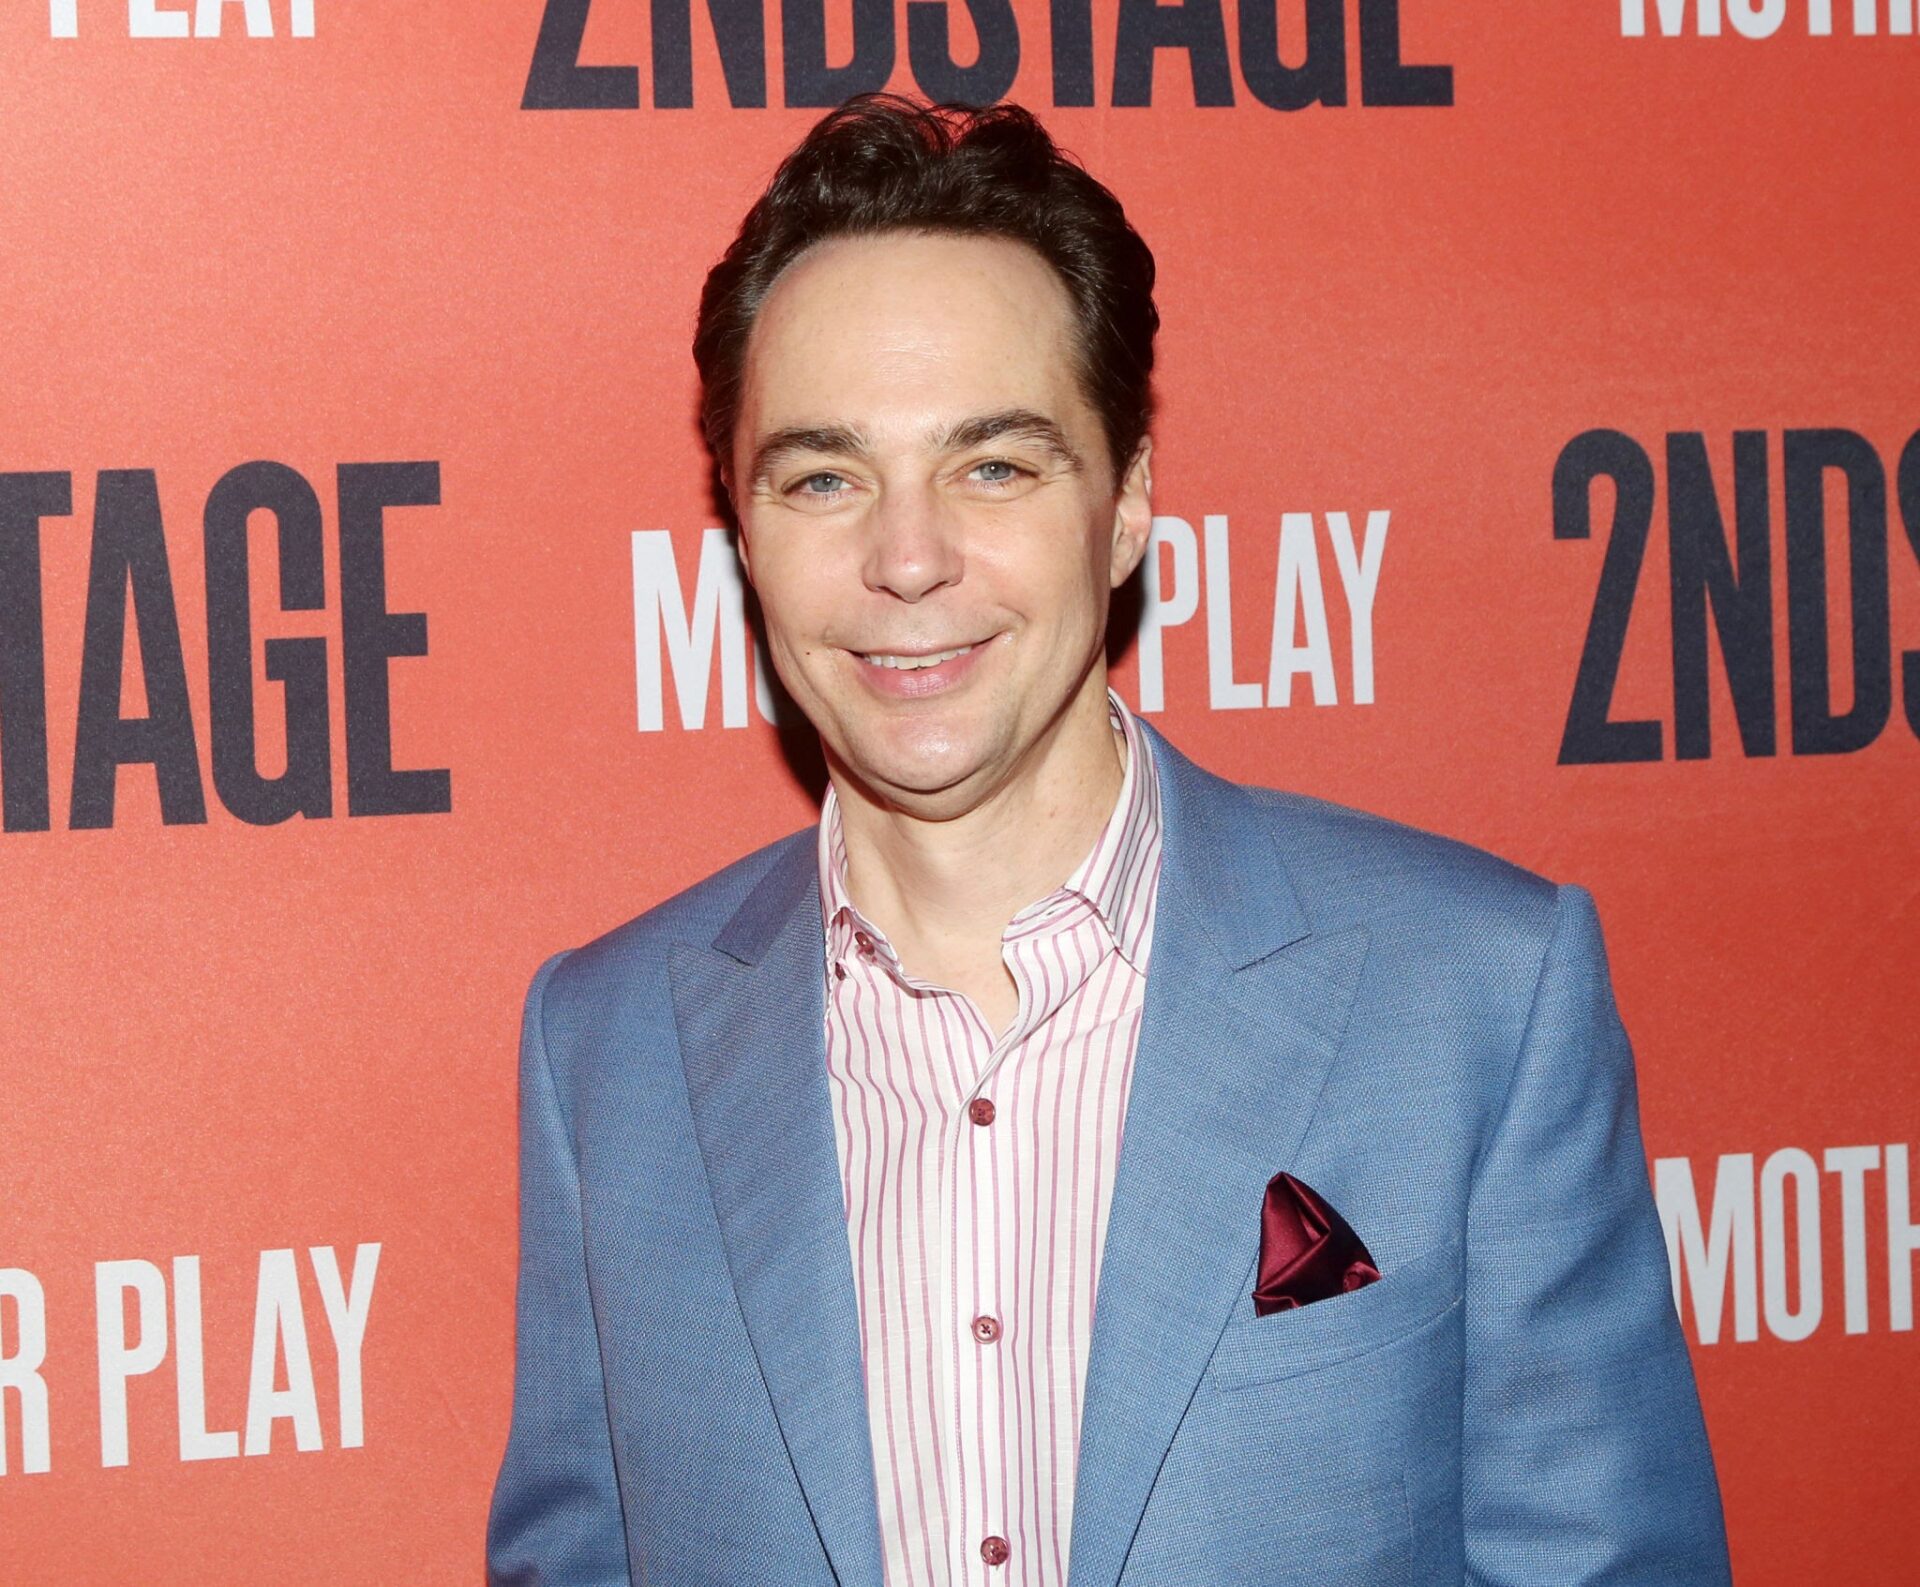 Jim Parsons Biography: Age, Net Worth, Instagram, Spouse, Height, Wiki, Parents, Siblings, Awards, Movies